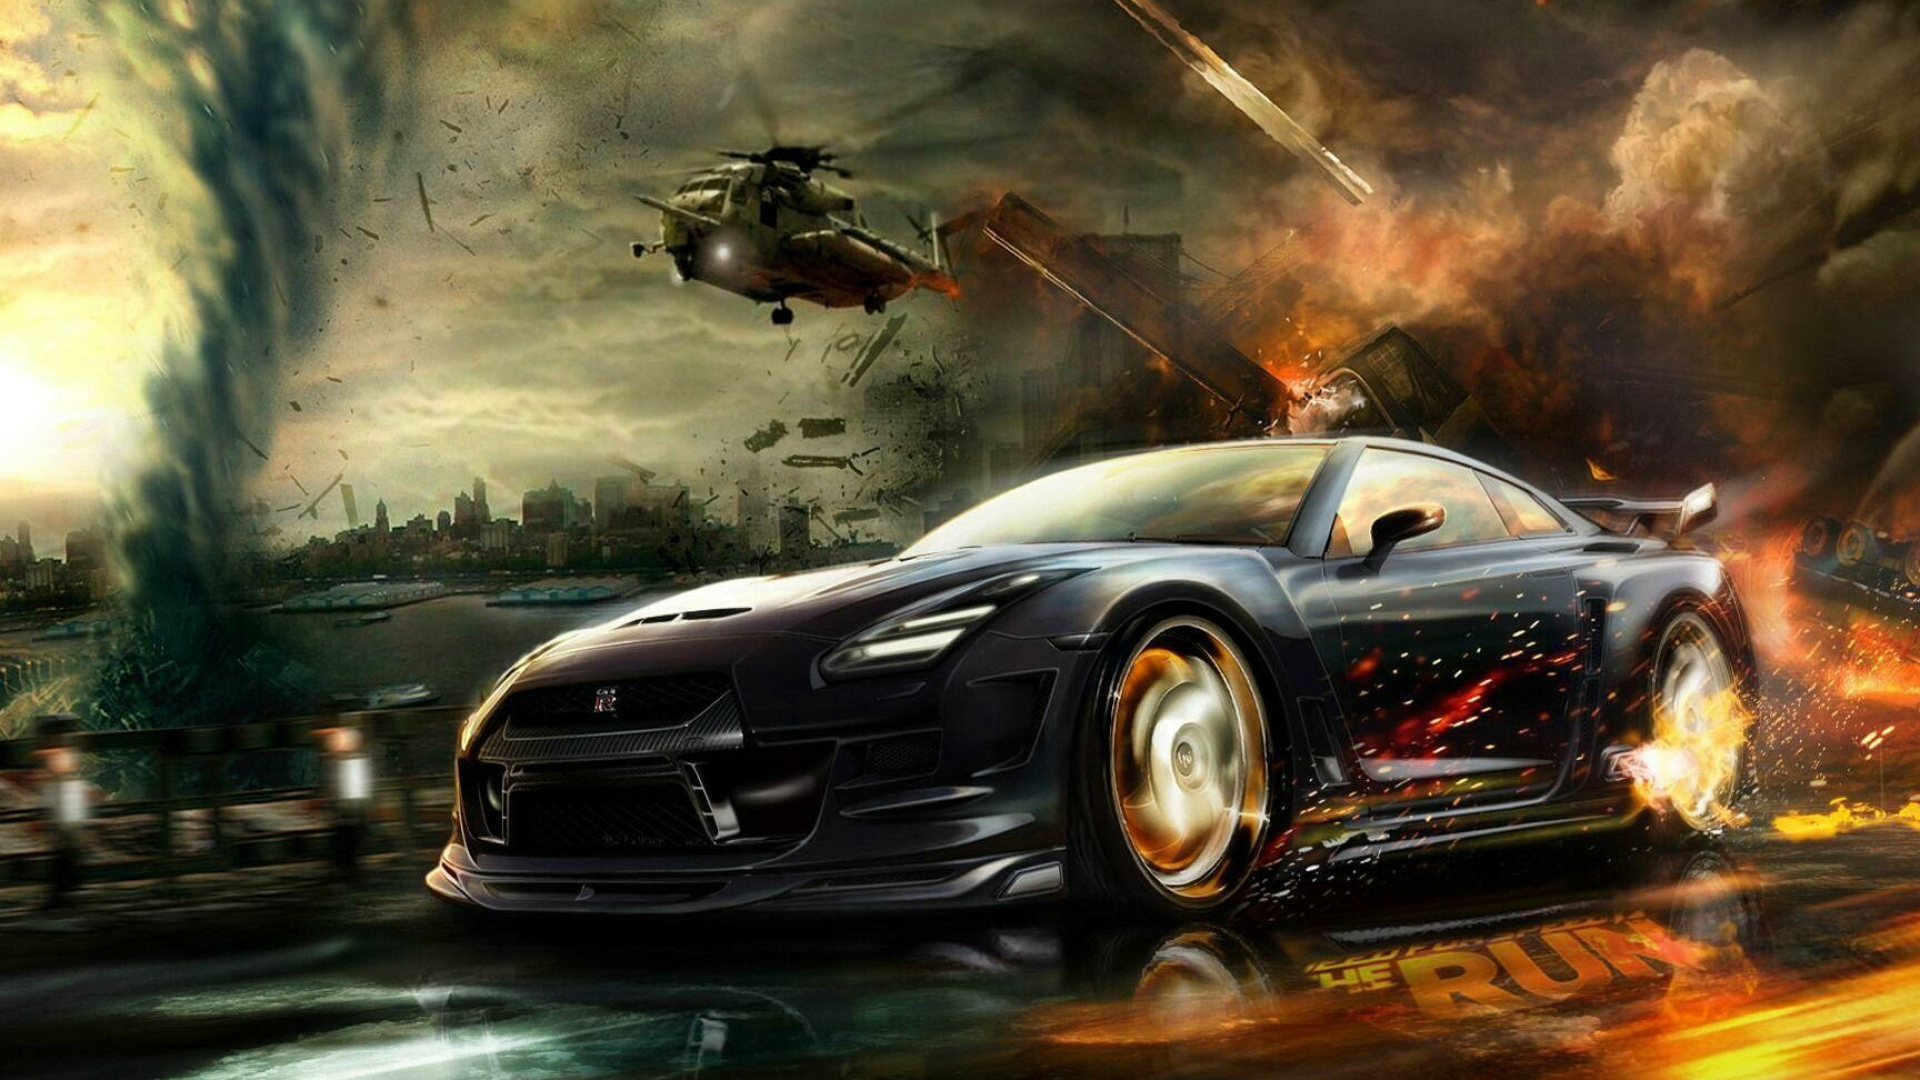 Need for Speed: A video-game franchise, Racing cars. 1920x1080 Full HD Wallpaper.